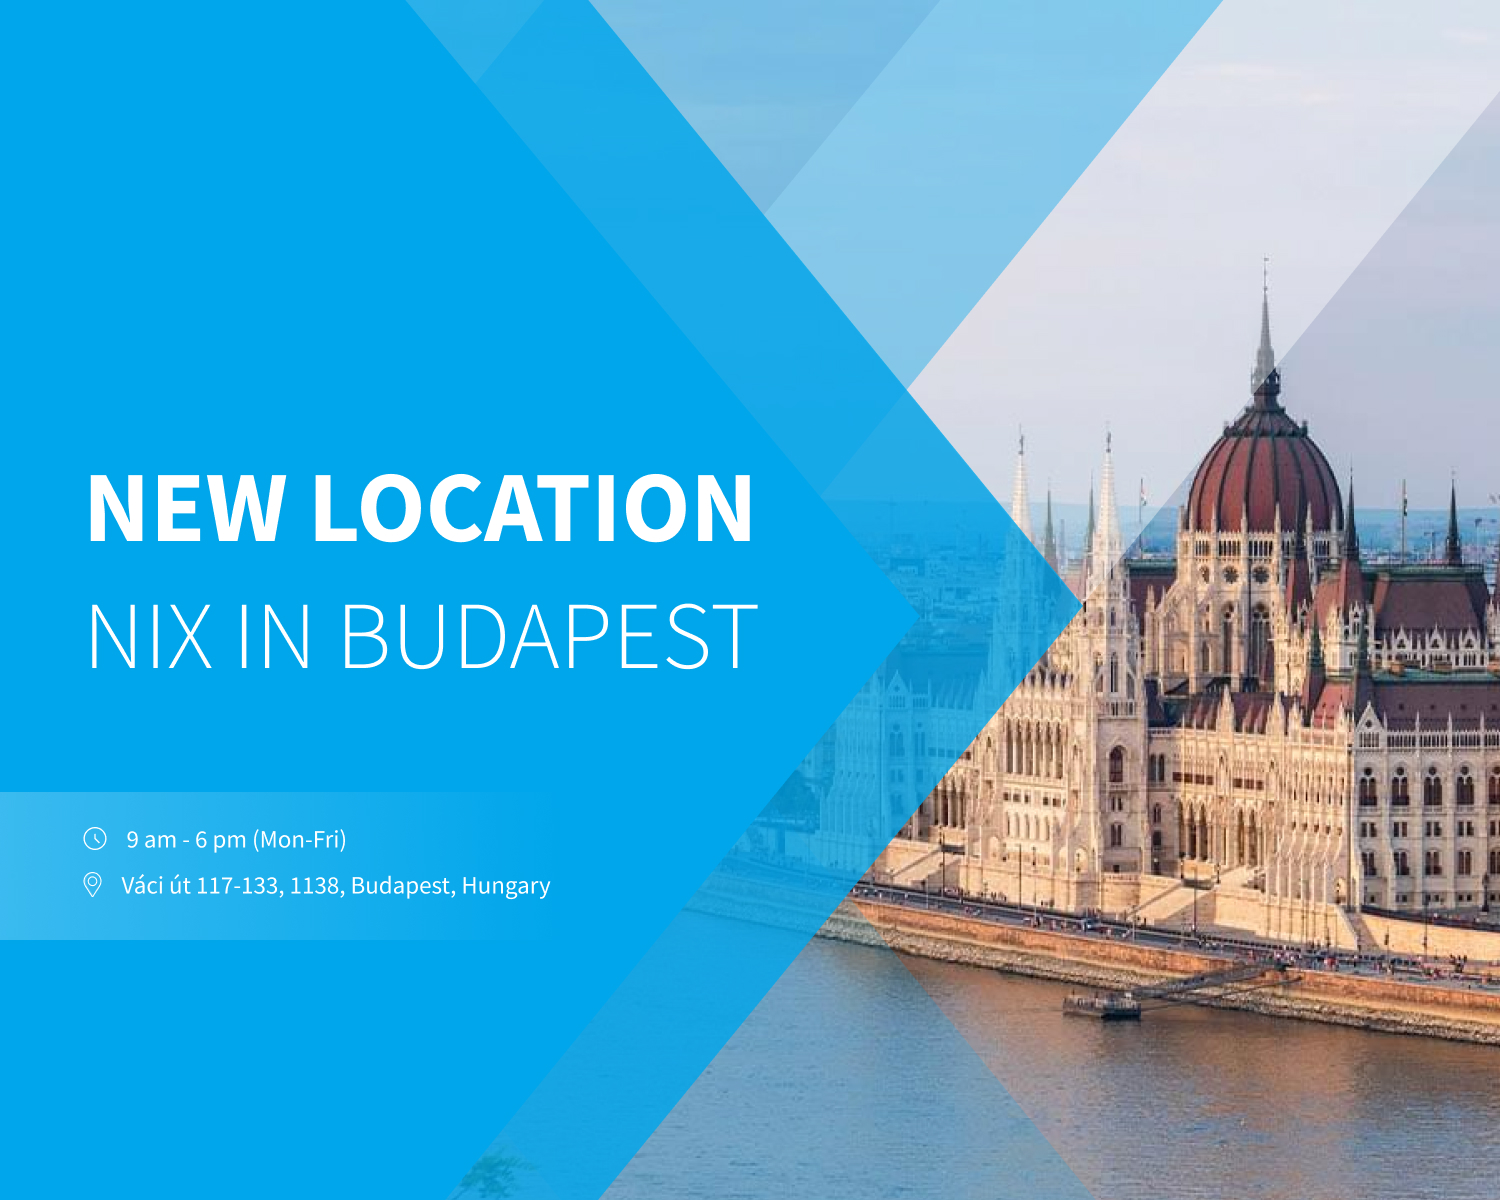 NIX Launches a New Delivery Location in Budapest